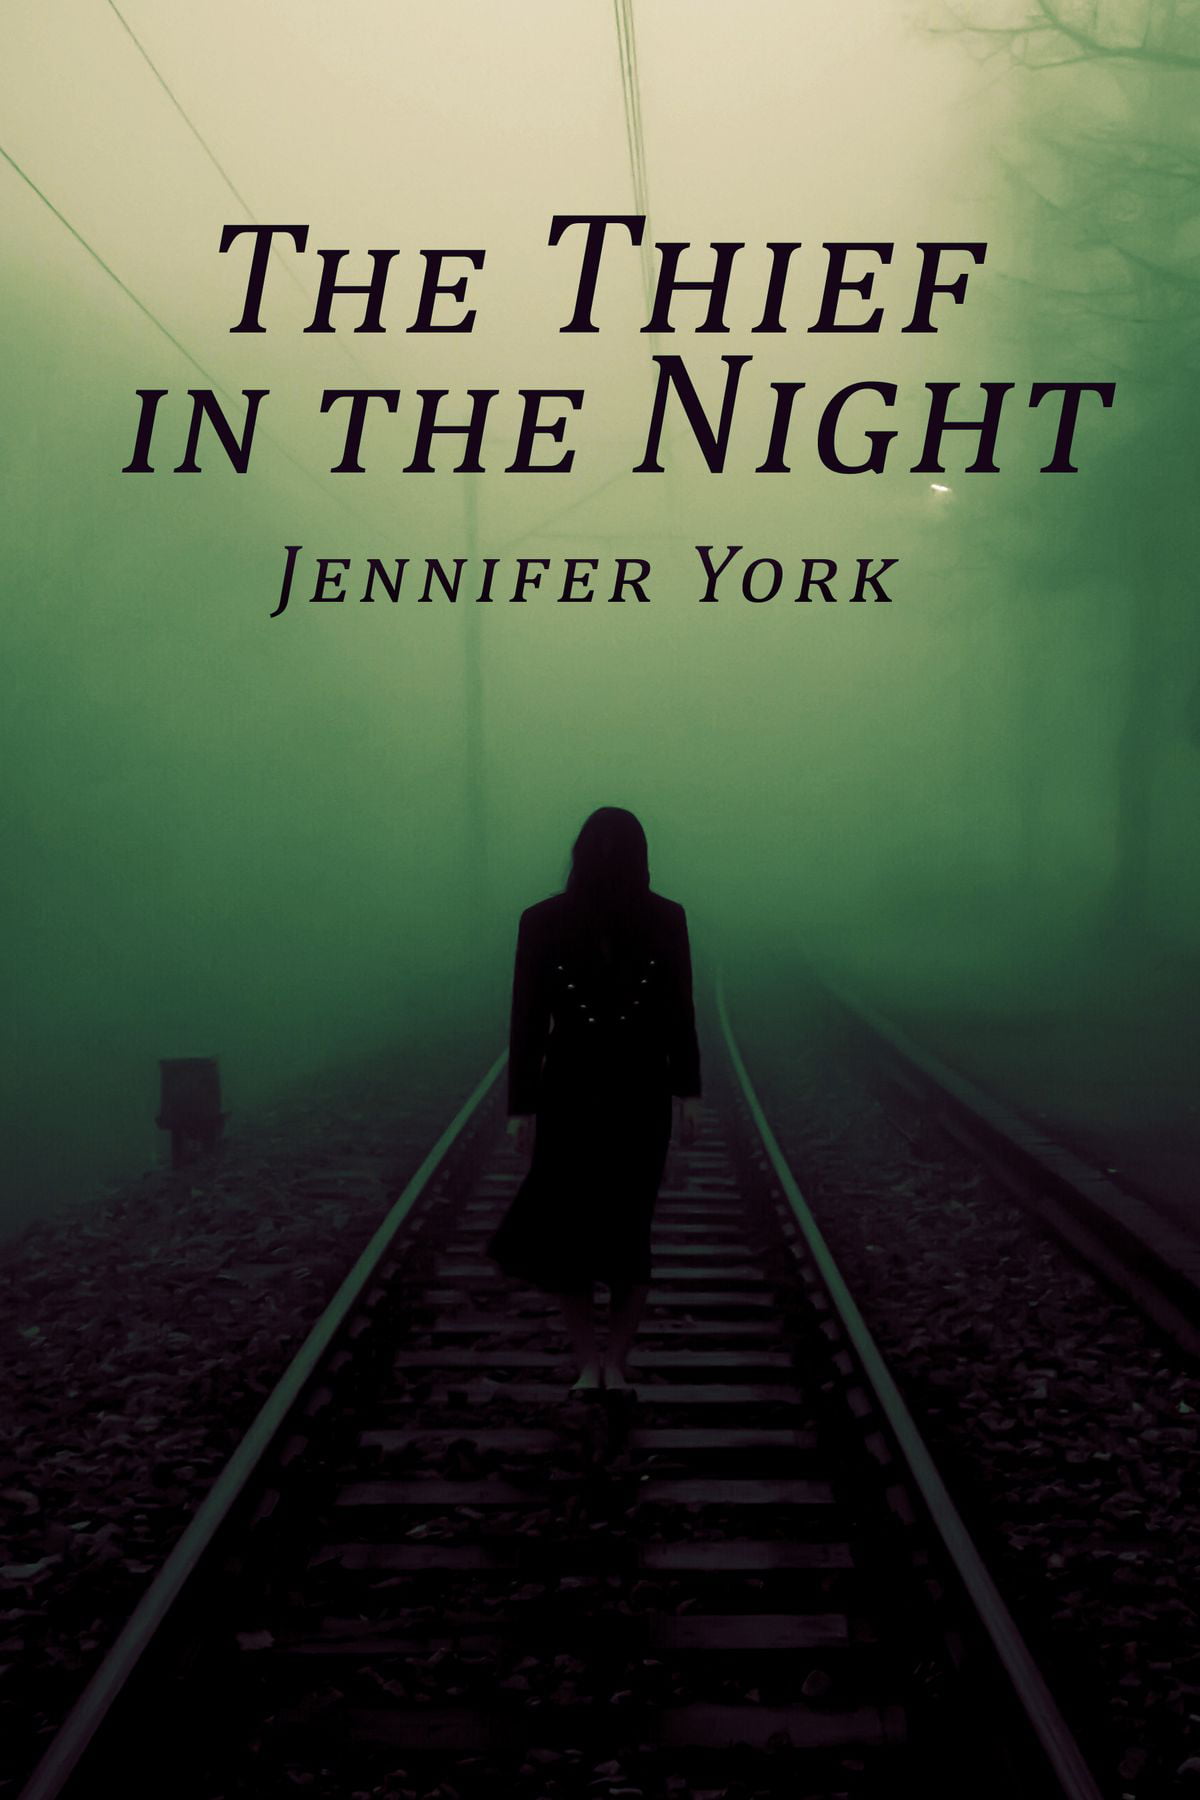 a thief in the night series